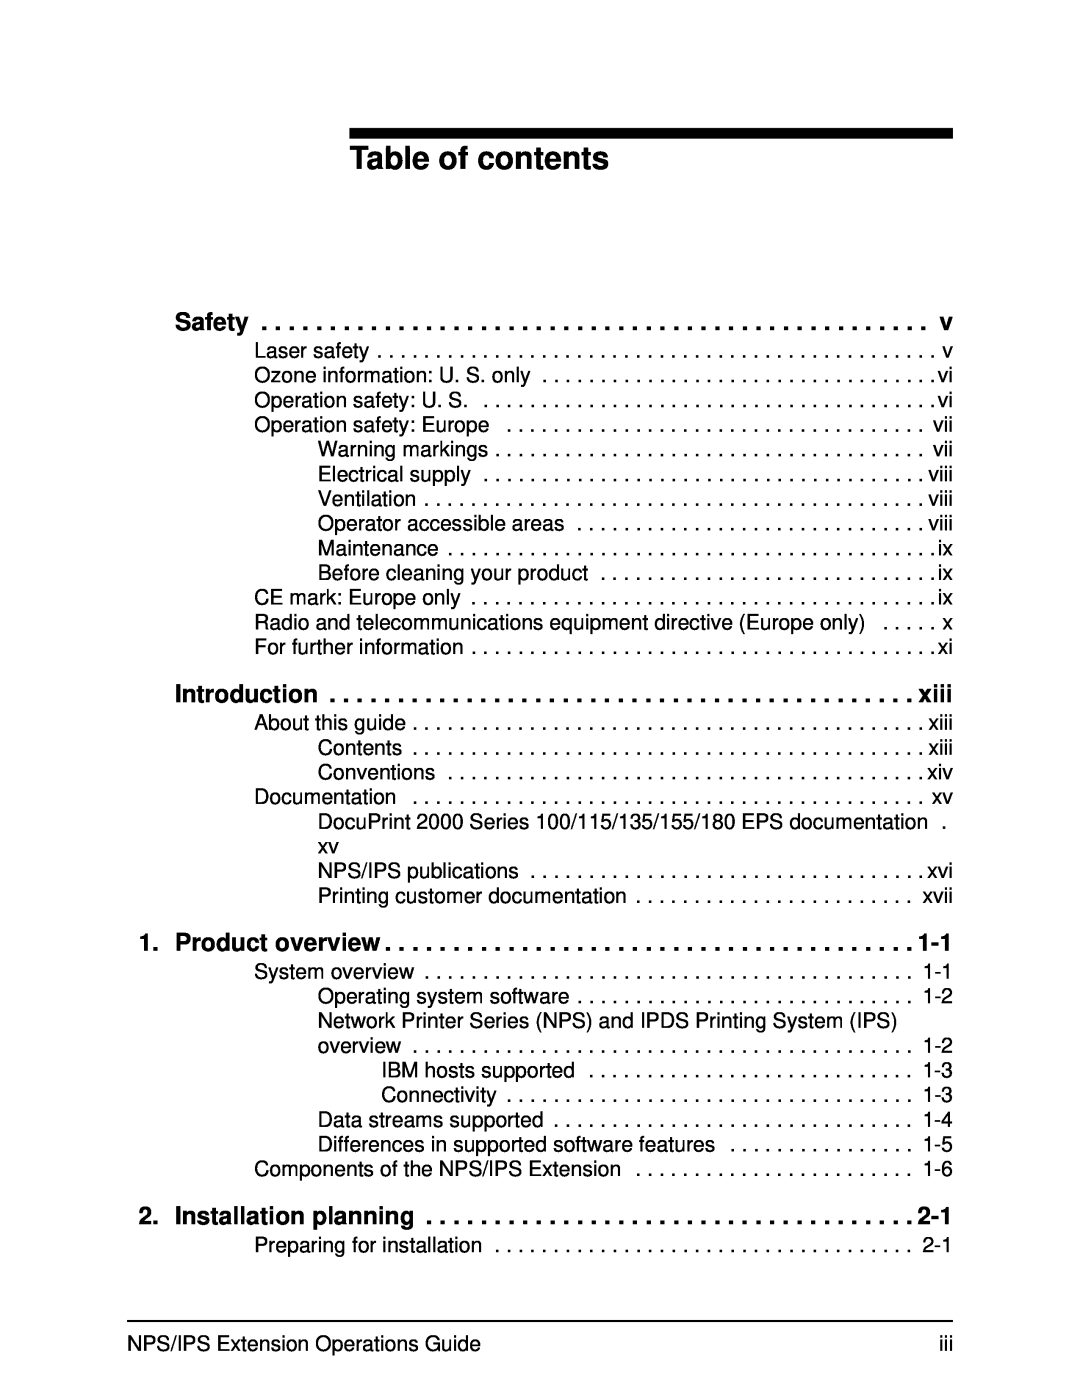 Xerox 2000 Series manual Table of contents 